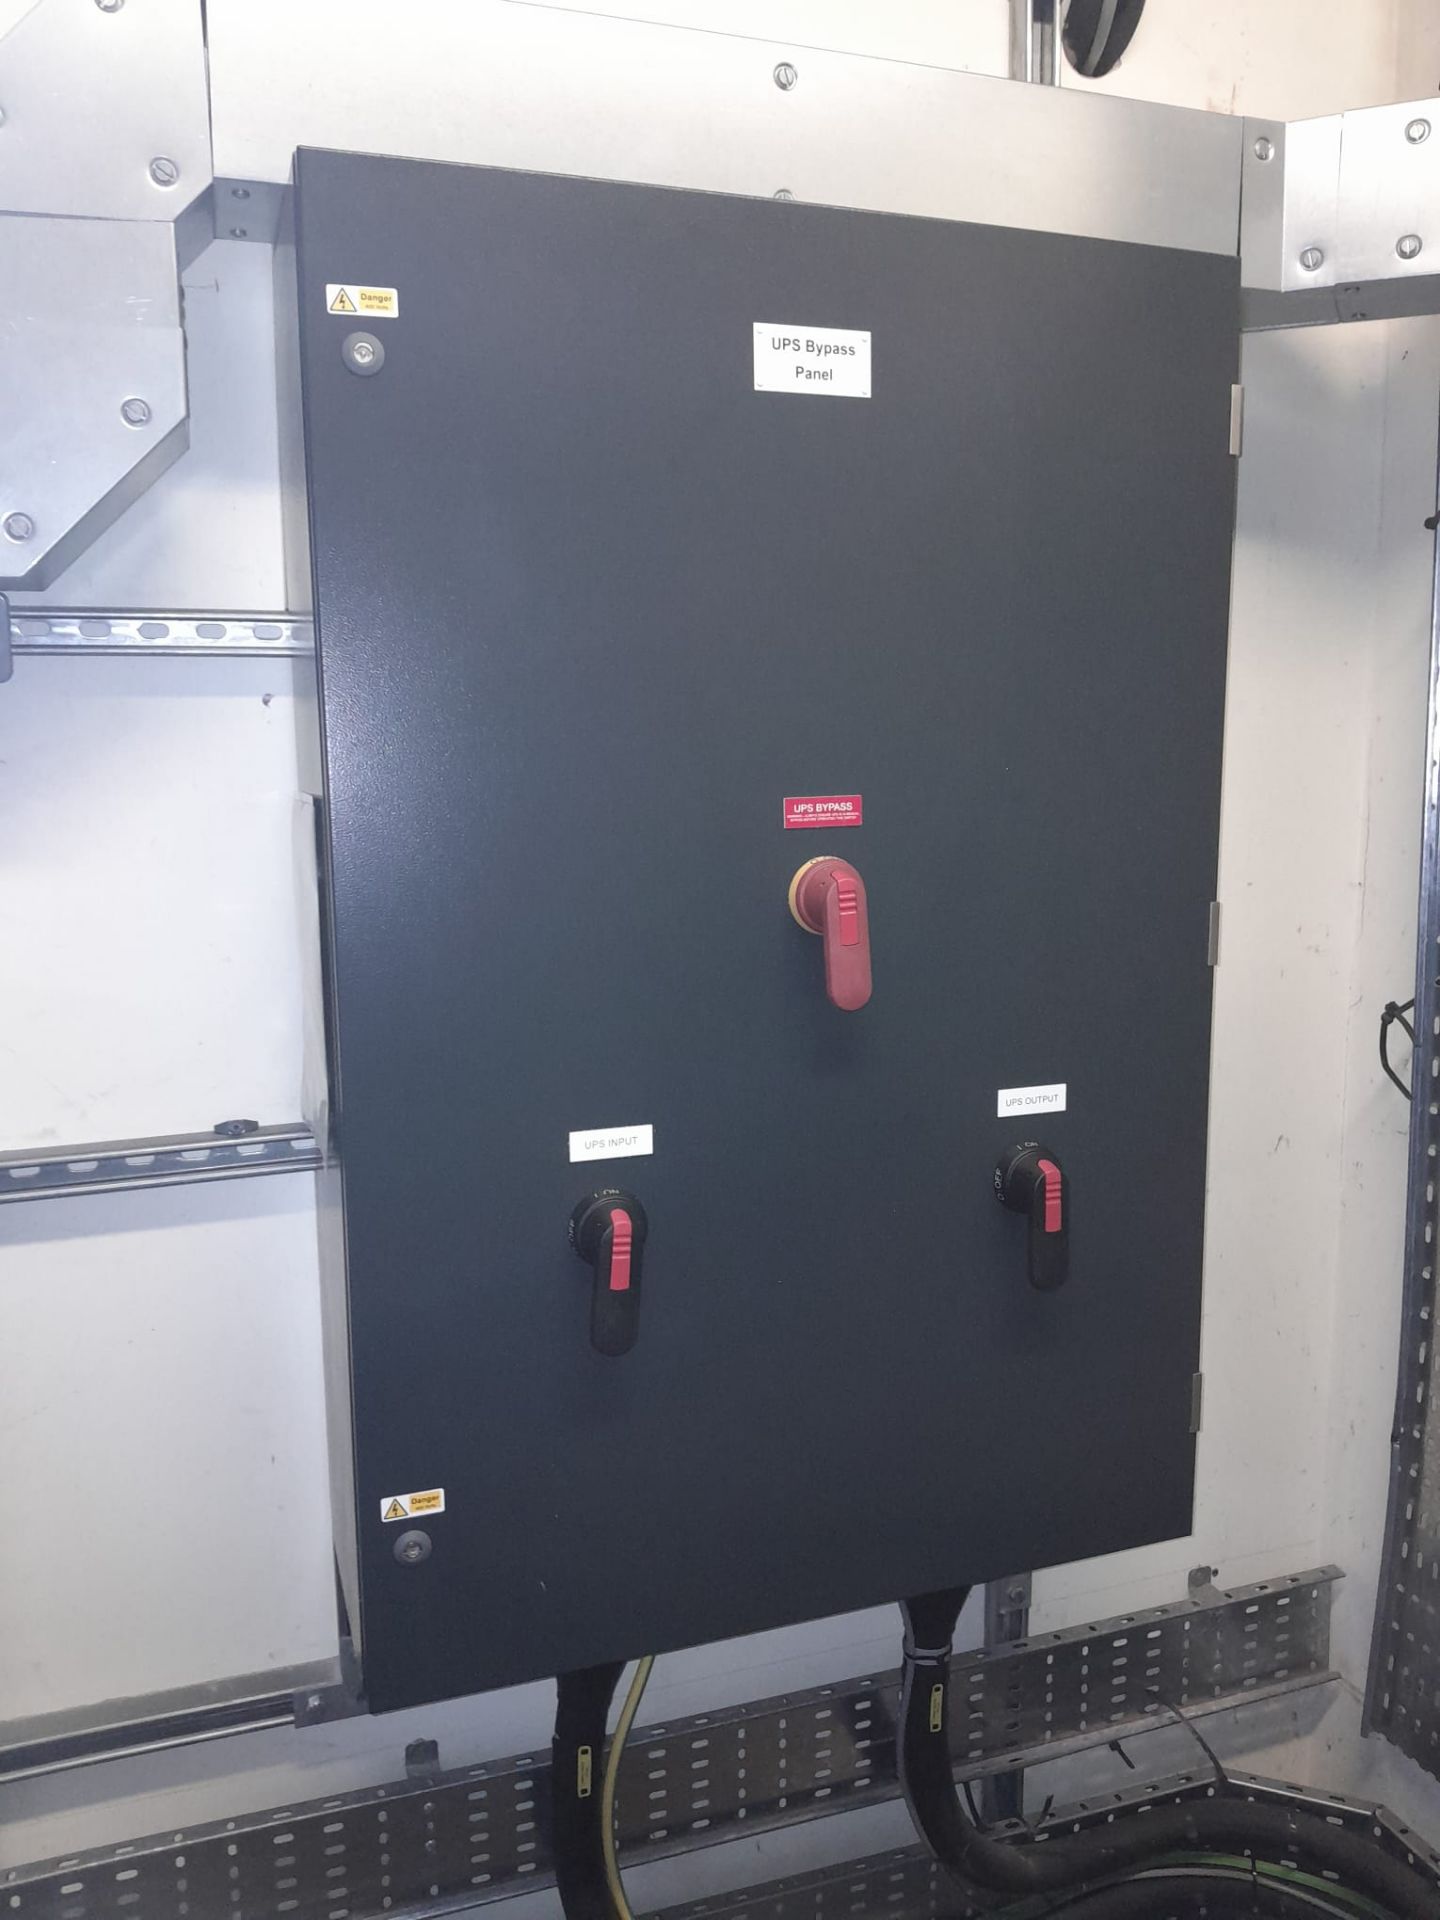 Riello MPW300 Uninterruptible Power Supply UPS, serial no. ME09UP110530007, with connectivity panel, - Image 6 of 11